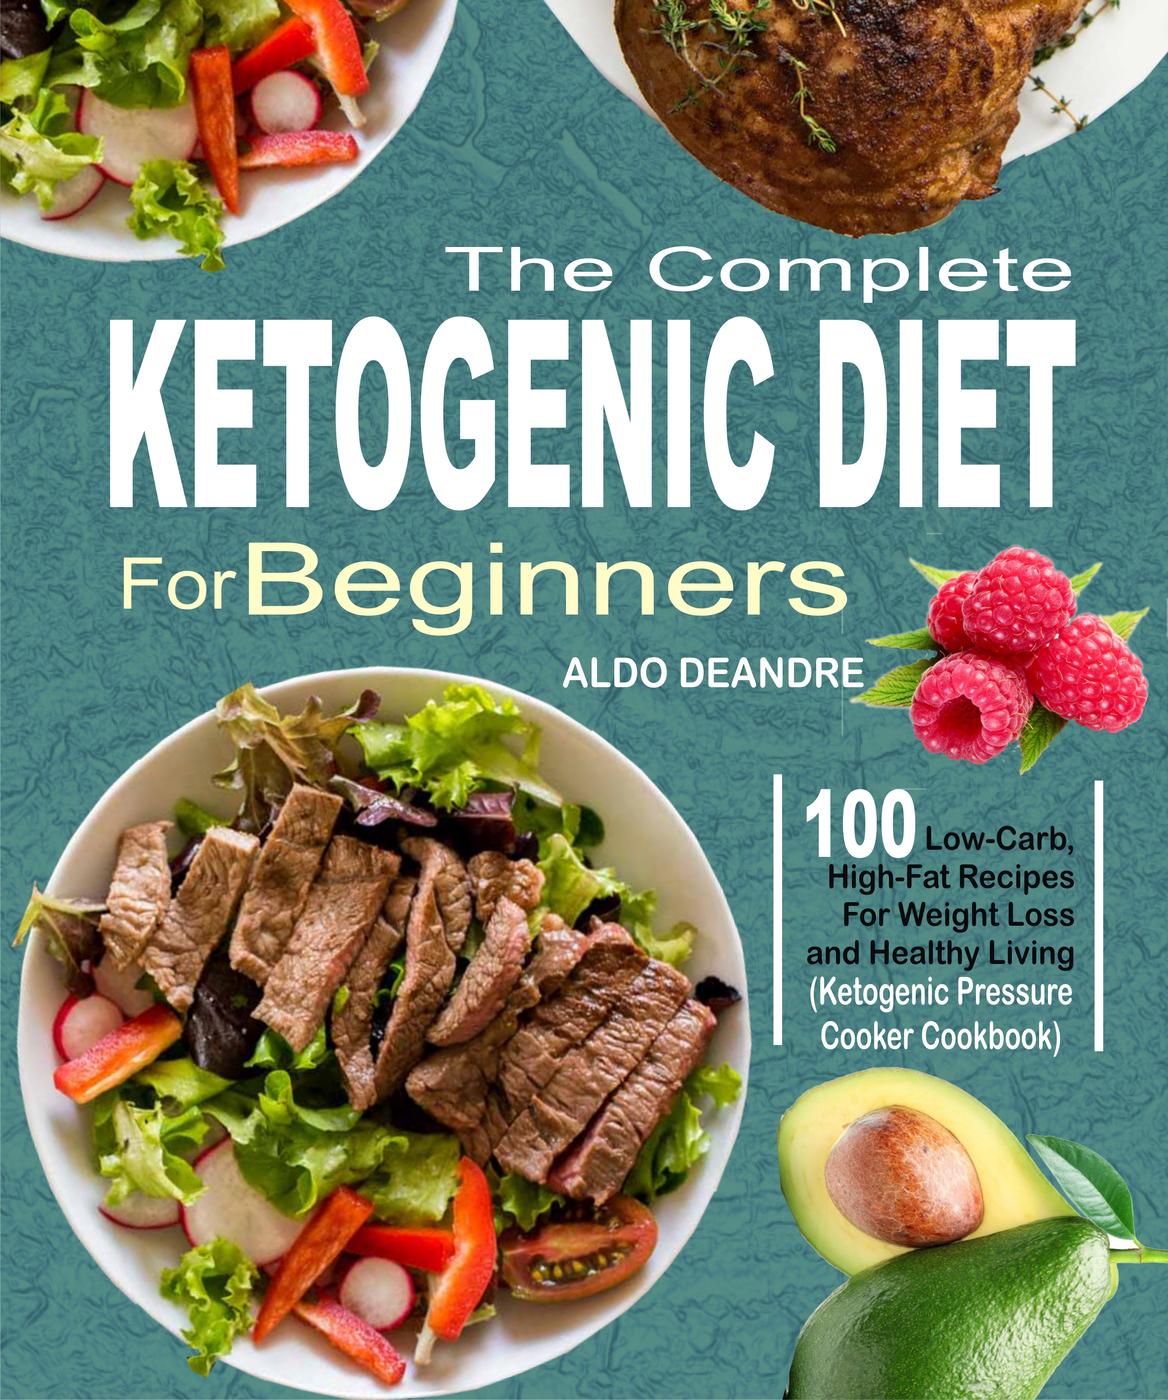 The Complete Ketogenic Diet for Beginners by Aldo Deandre - SoftArchive